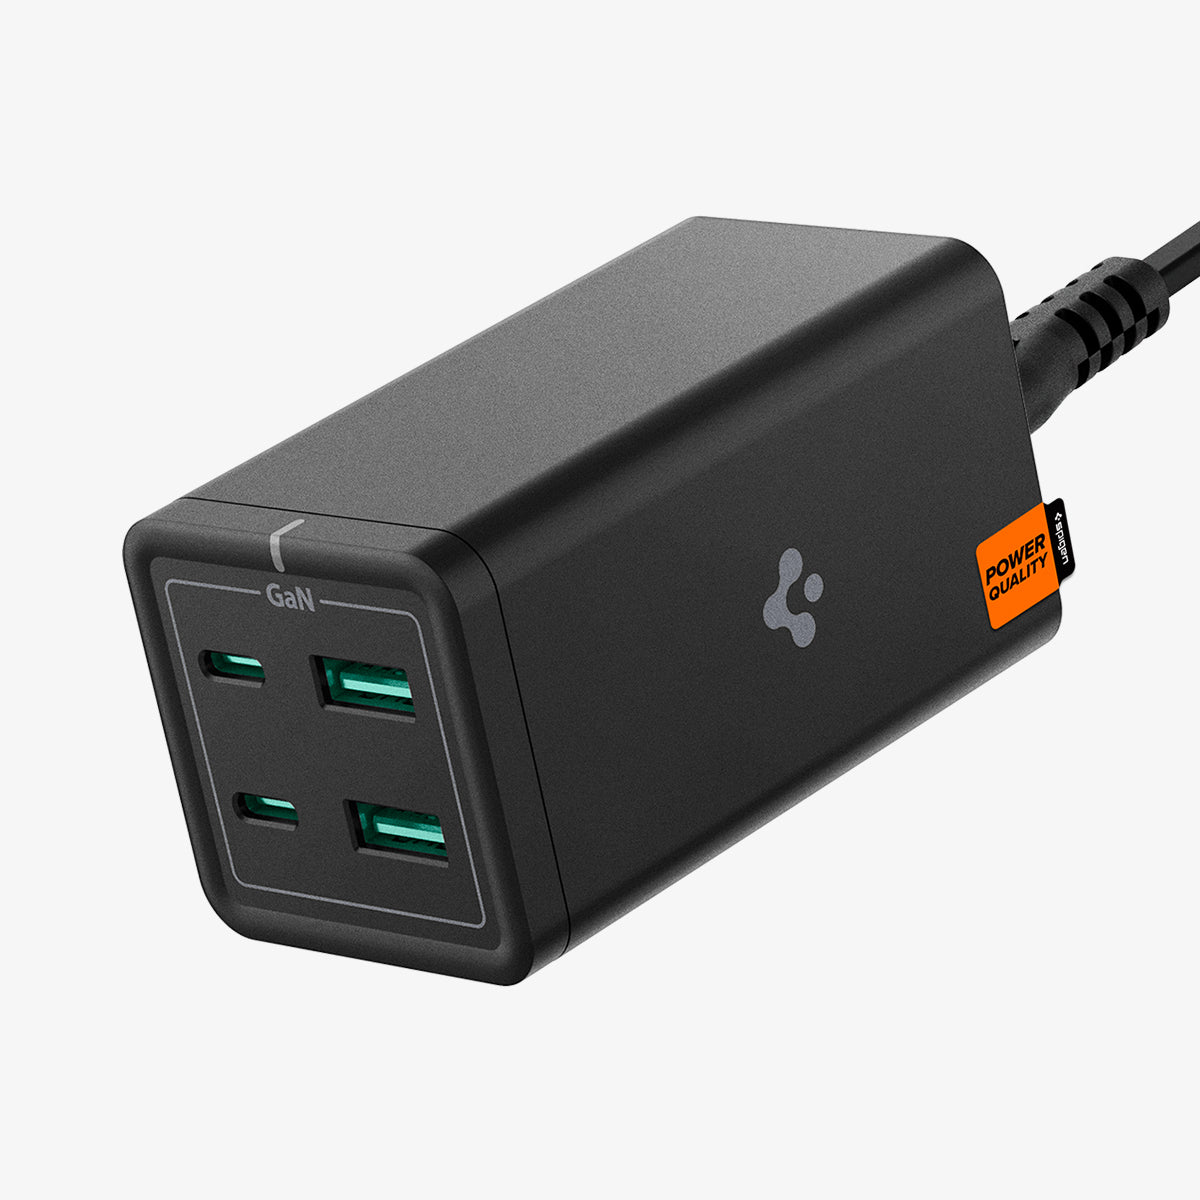 ACH03786 - Spigen ArcDock 120W Desktop Charger PD2100 in black showing the front, side and top